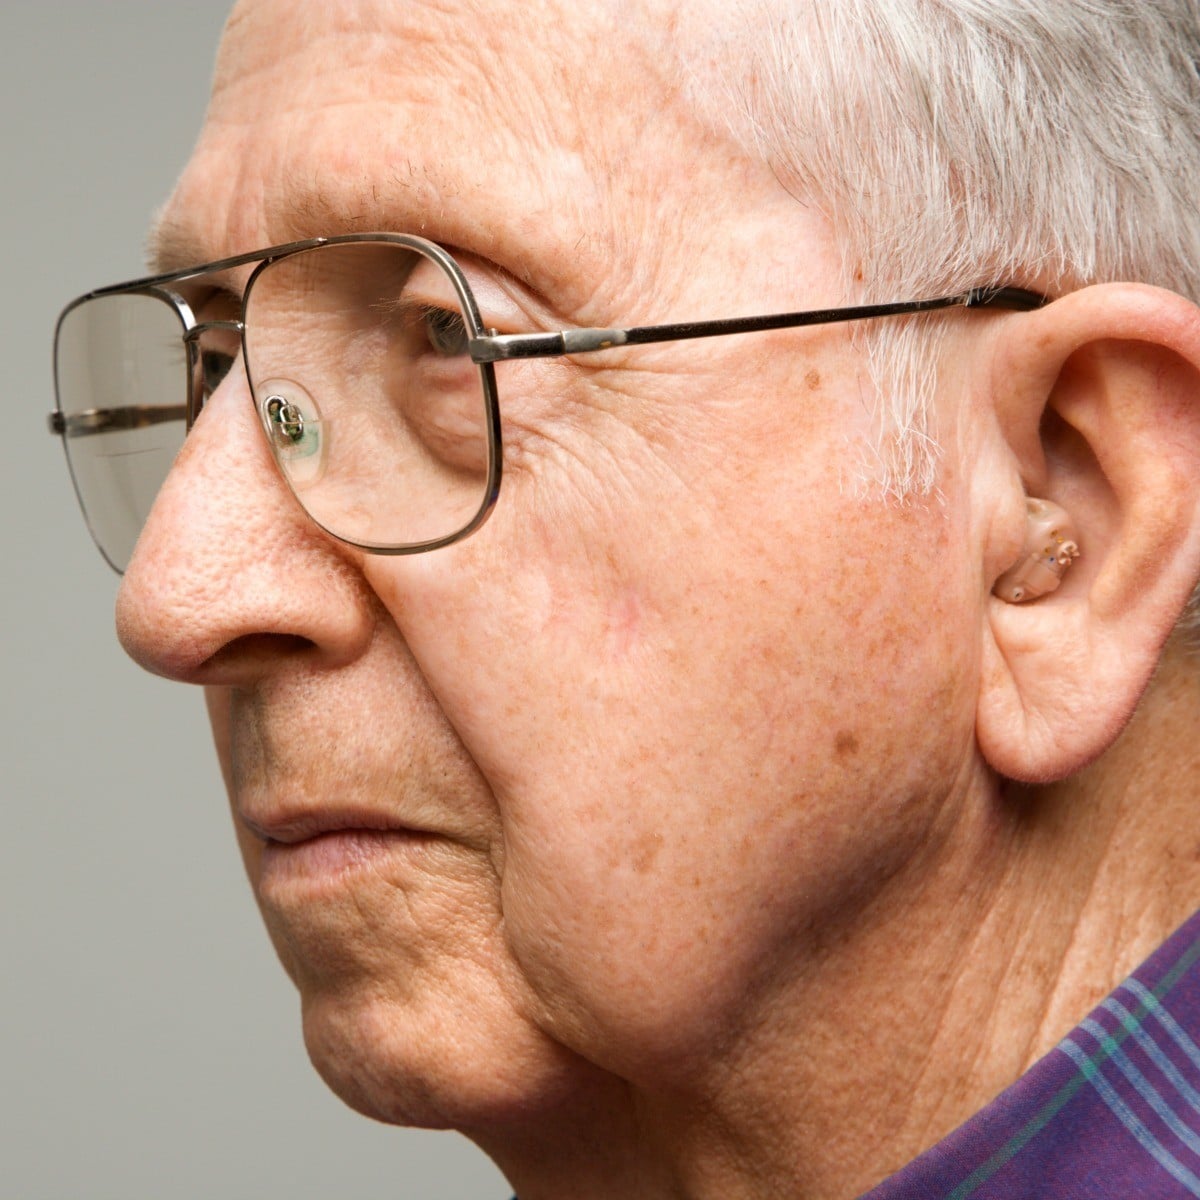 Hearing Aids for Low Income Seniors?